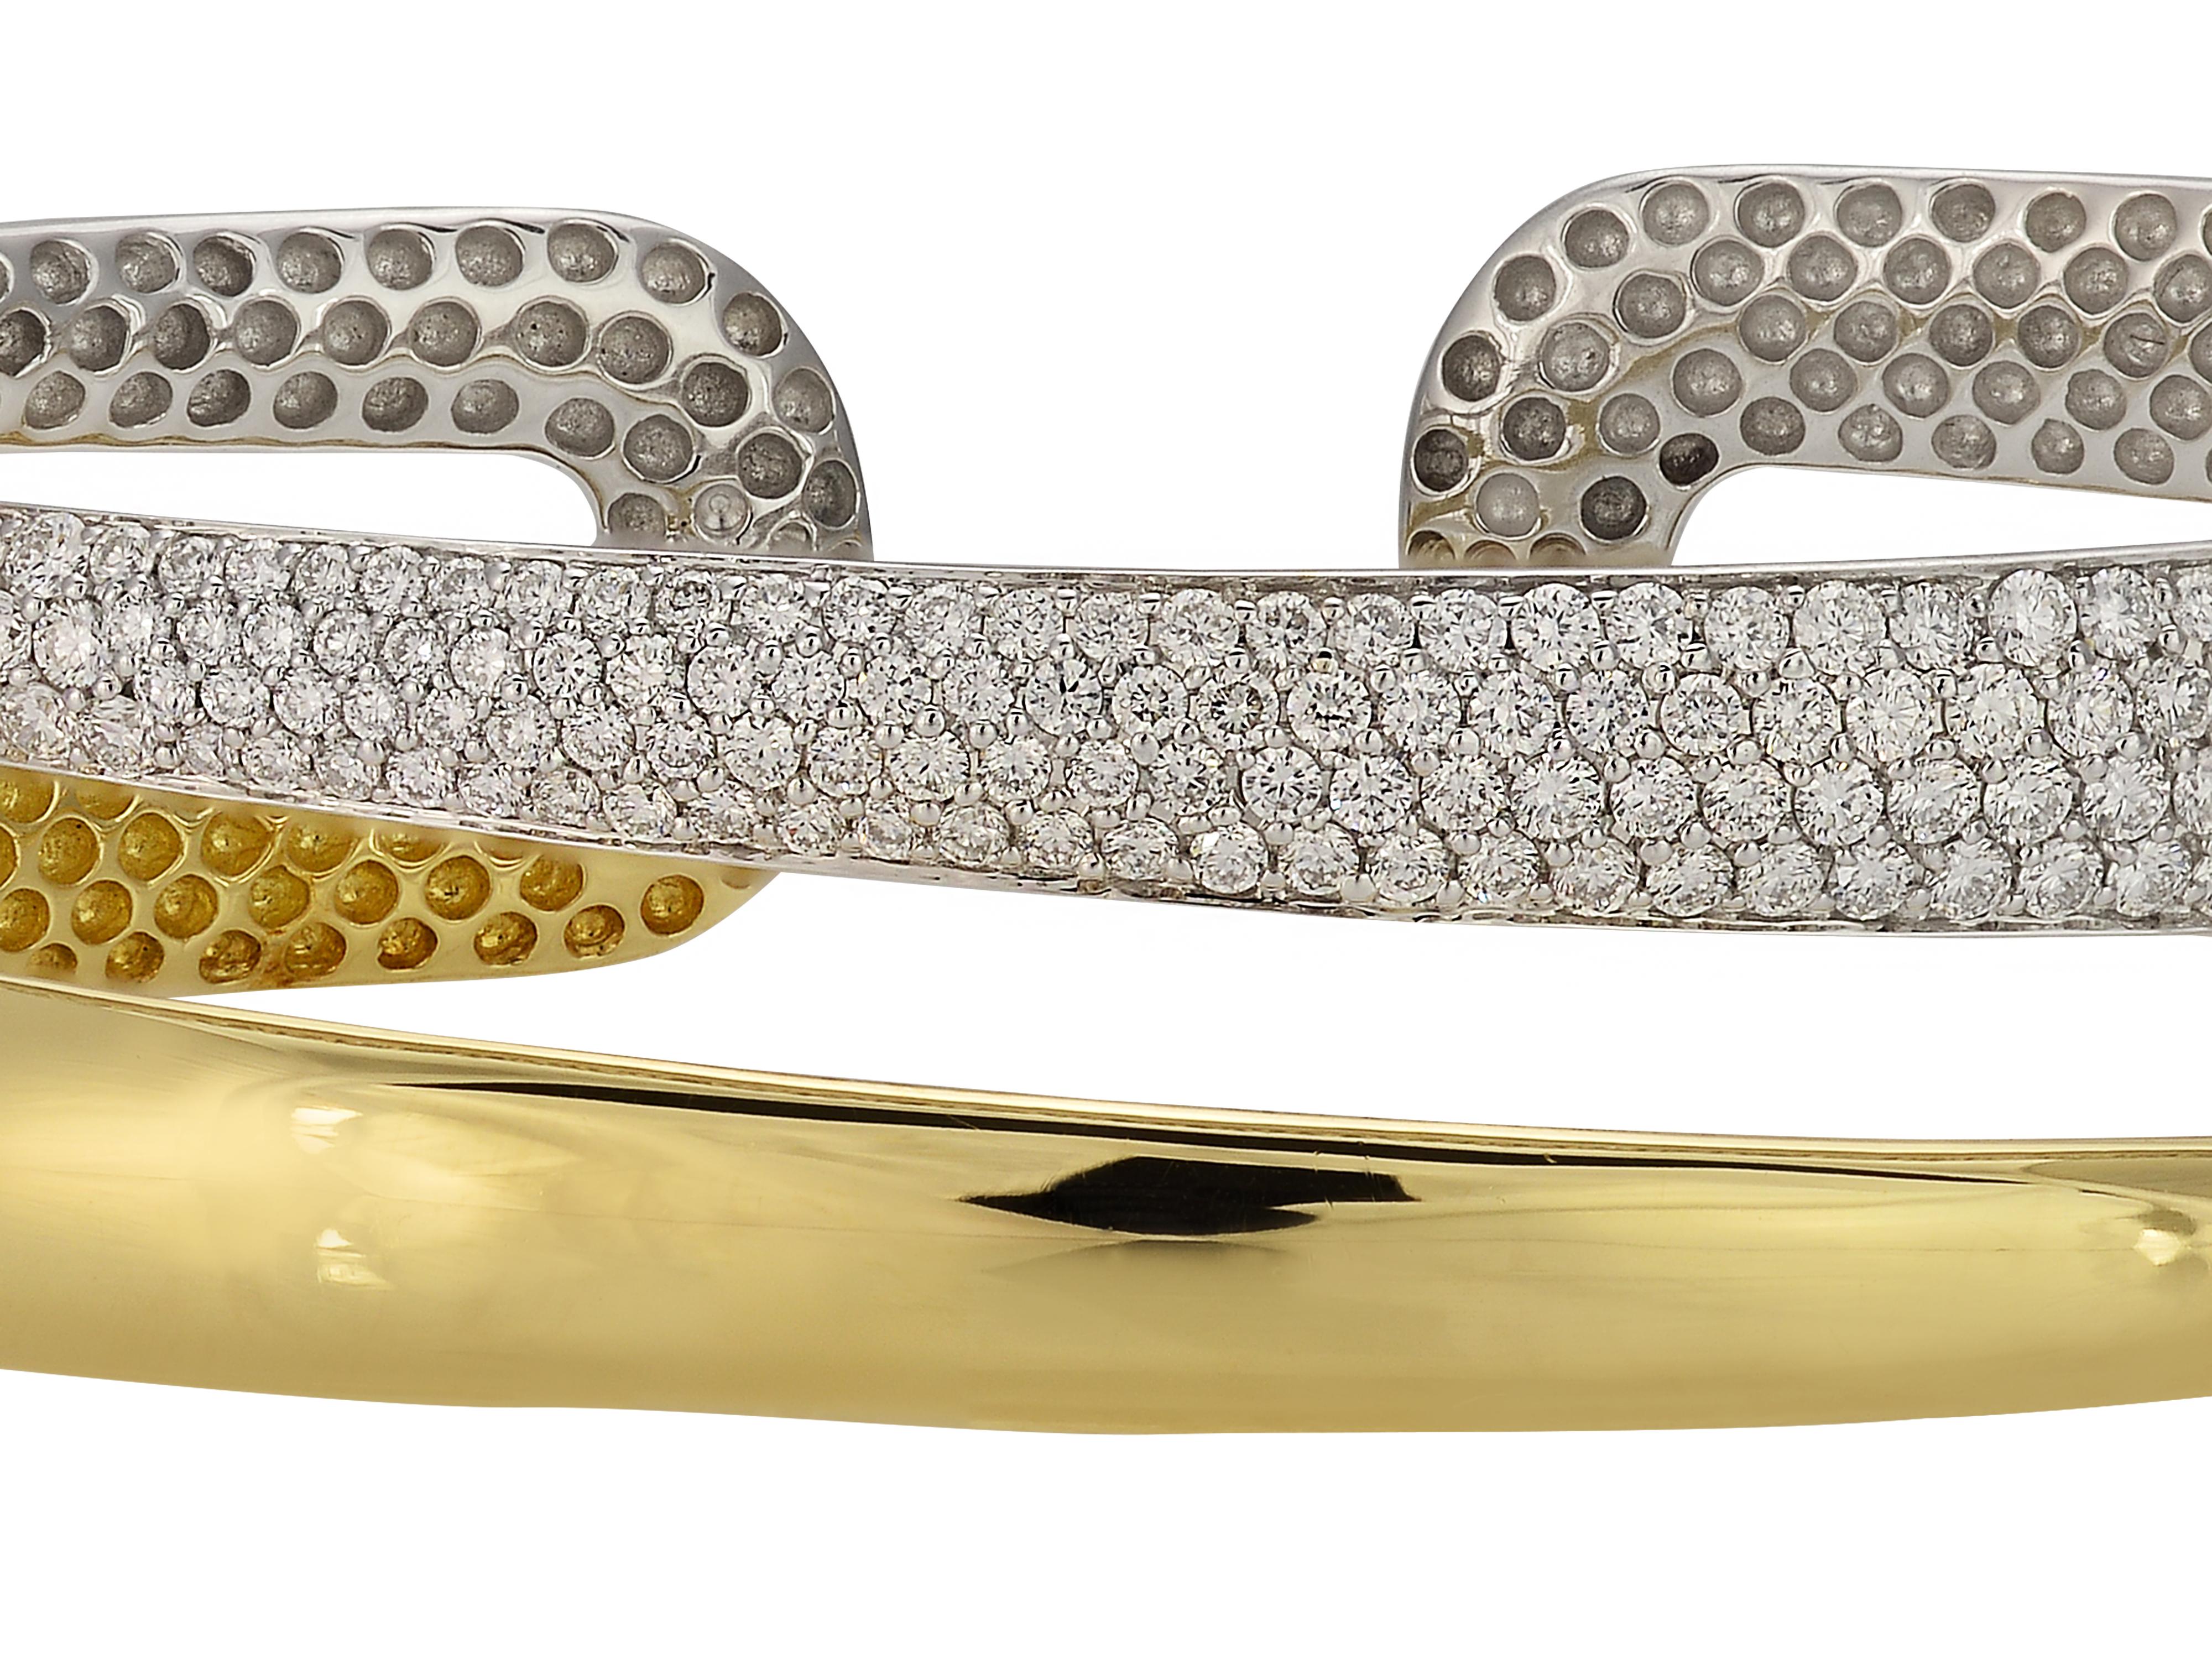 18 karat white and yellow gold hinged diamond cuff bracelet from Roberto Coin Scalare Collection. The bracelet design gives the illusion of two stacked bracelets when viewed from above. The pave set bracelet contains 1.75 carats of round brilliant